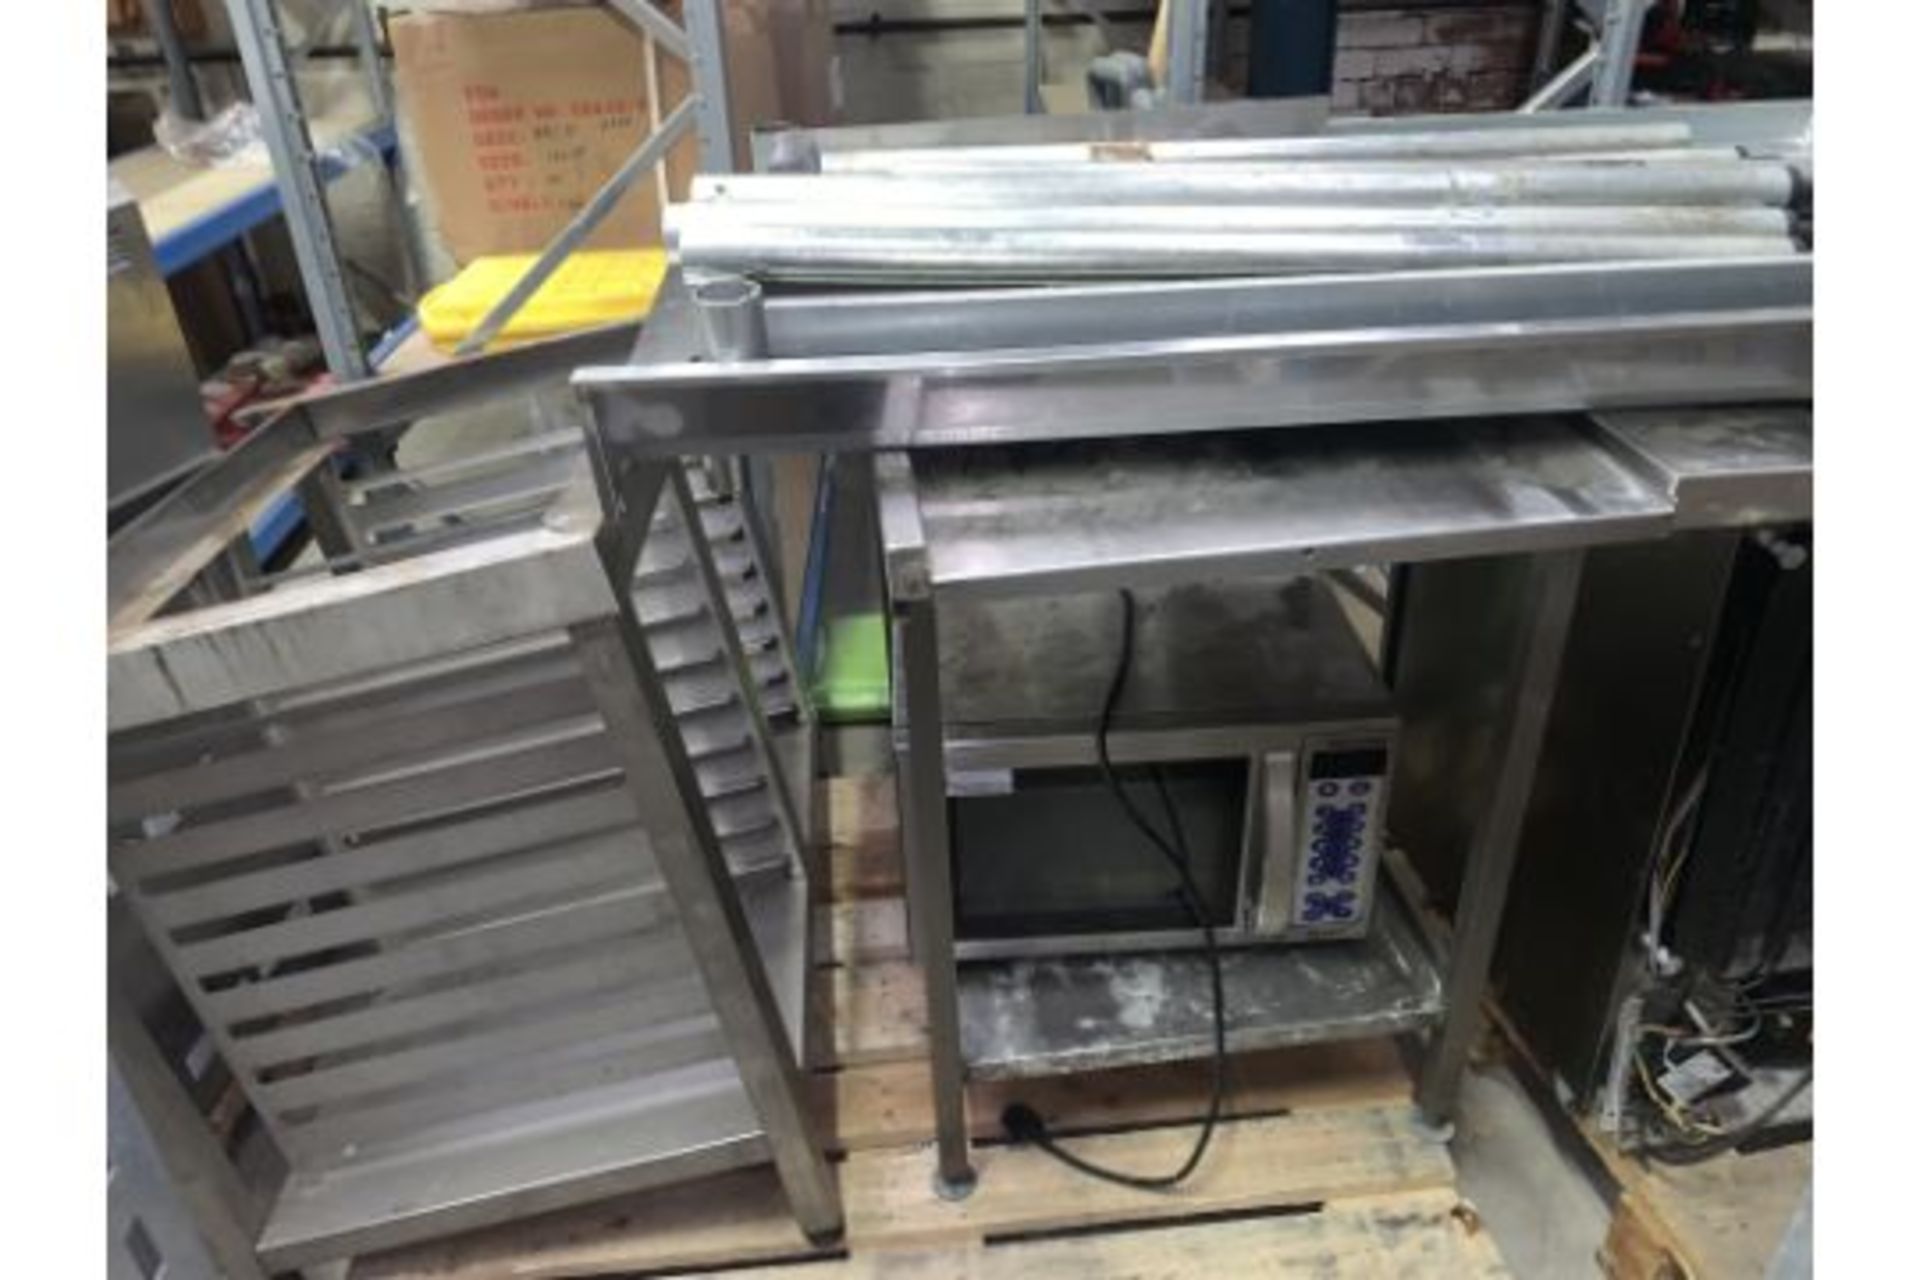 LOT CONTAINING STAINLESS STEE; TRAY HOLDER. STAINLESS STEEL PREP TABLE, MERRY CHEF MICROWAVE